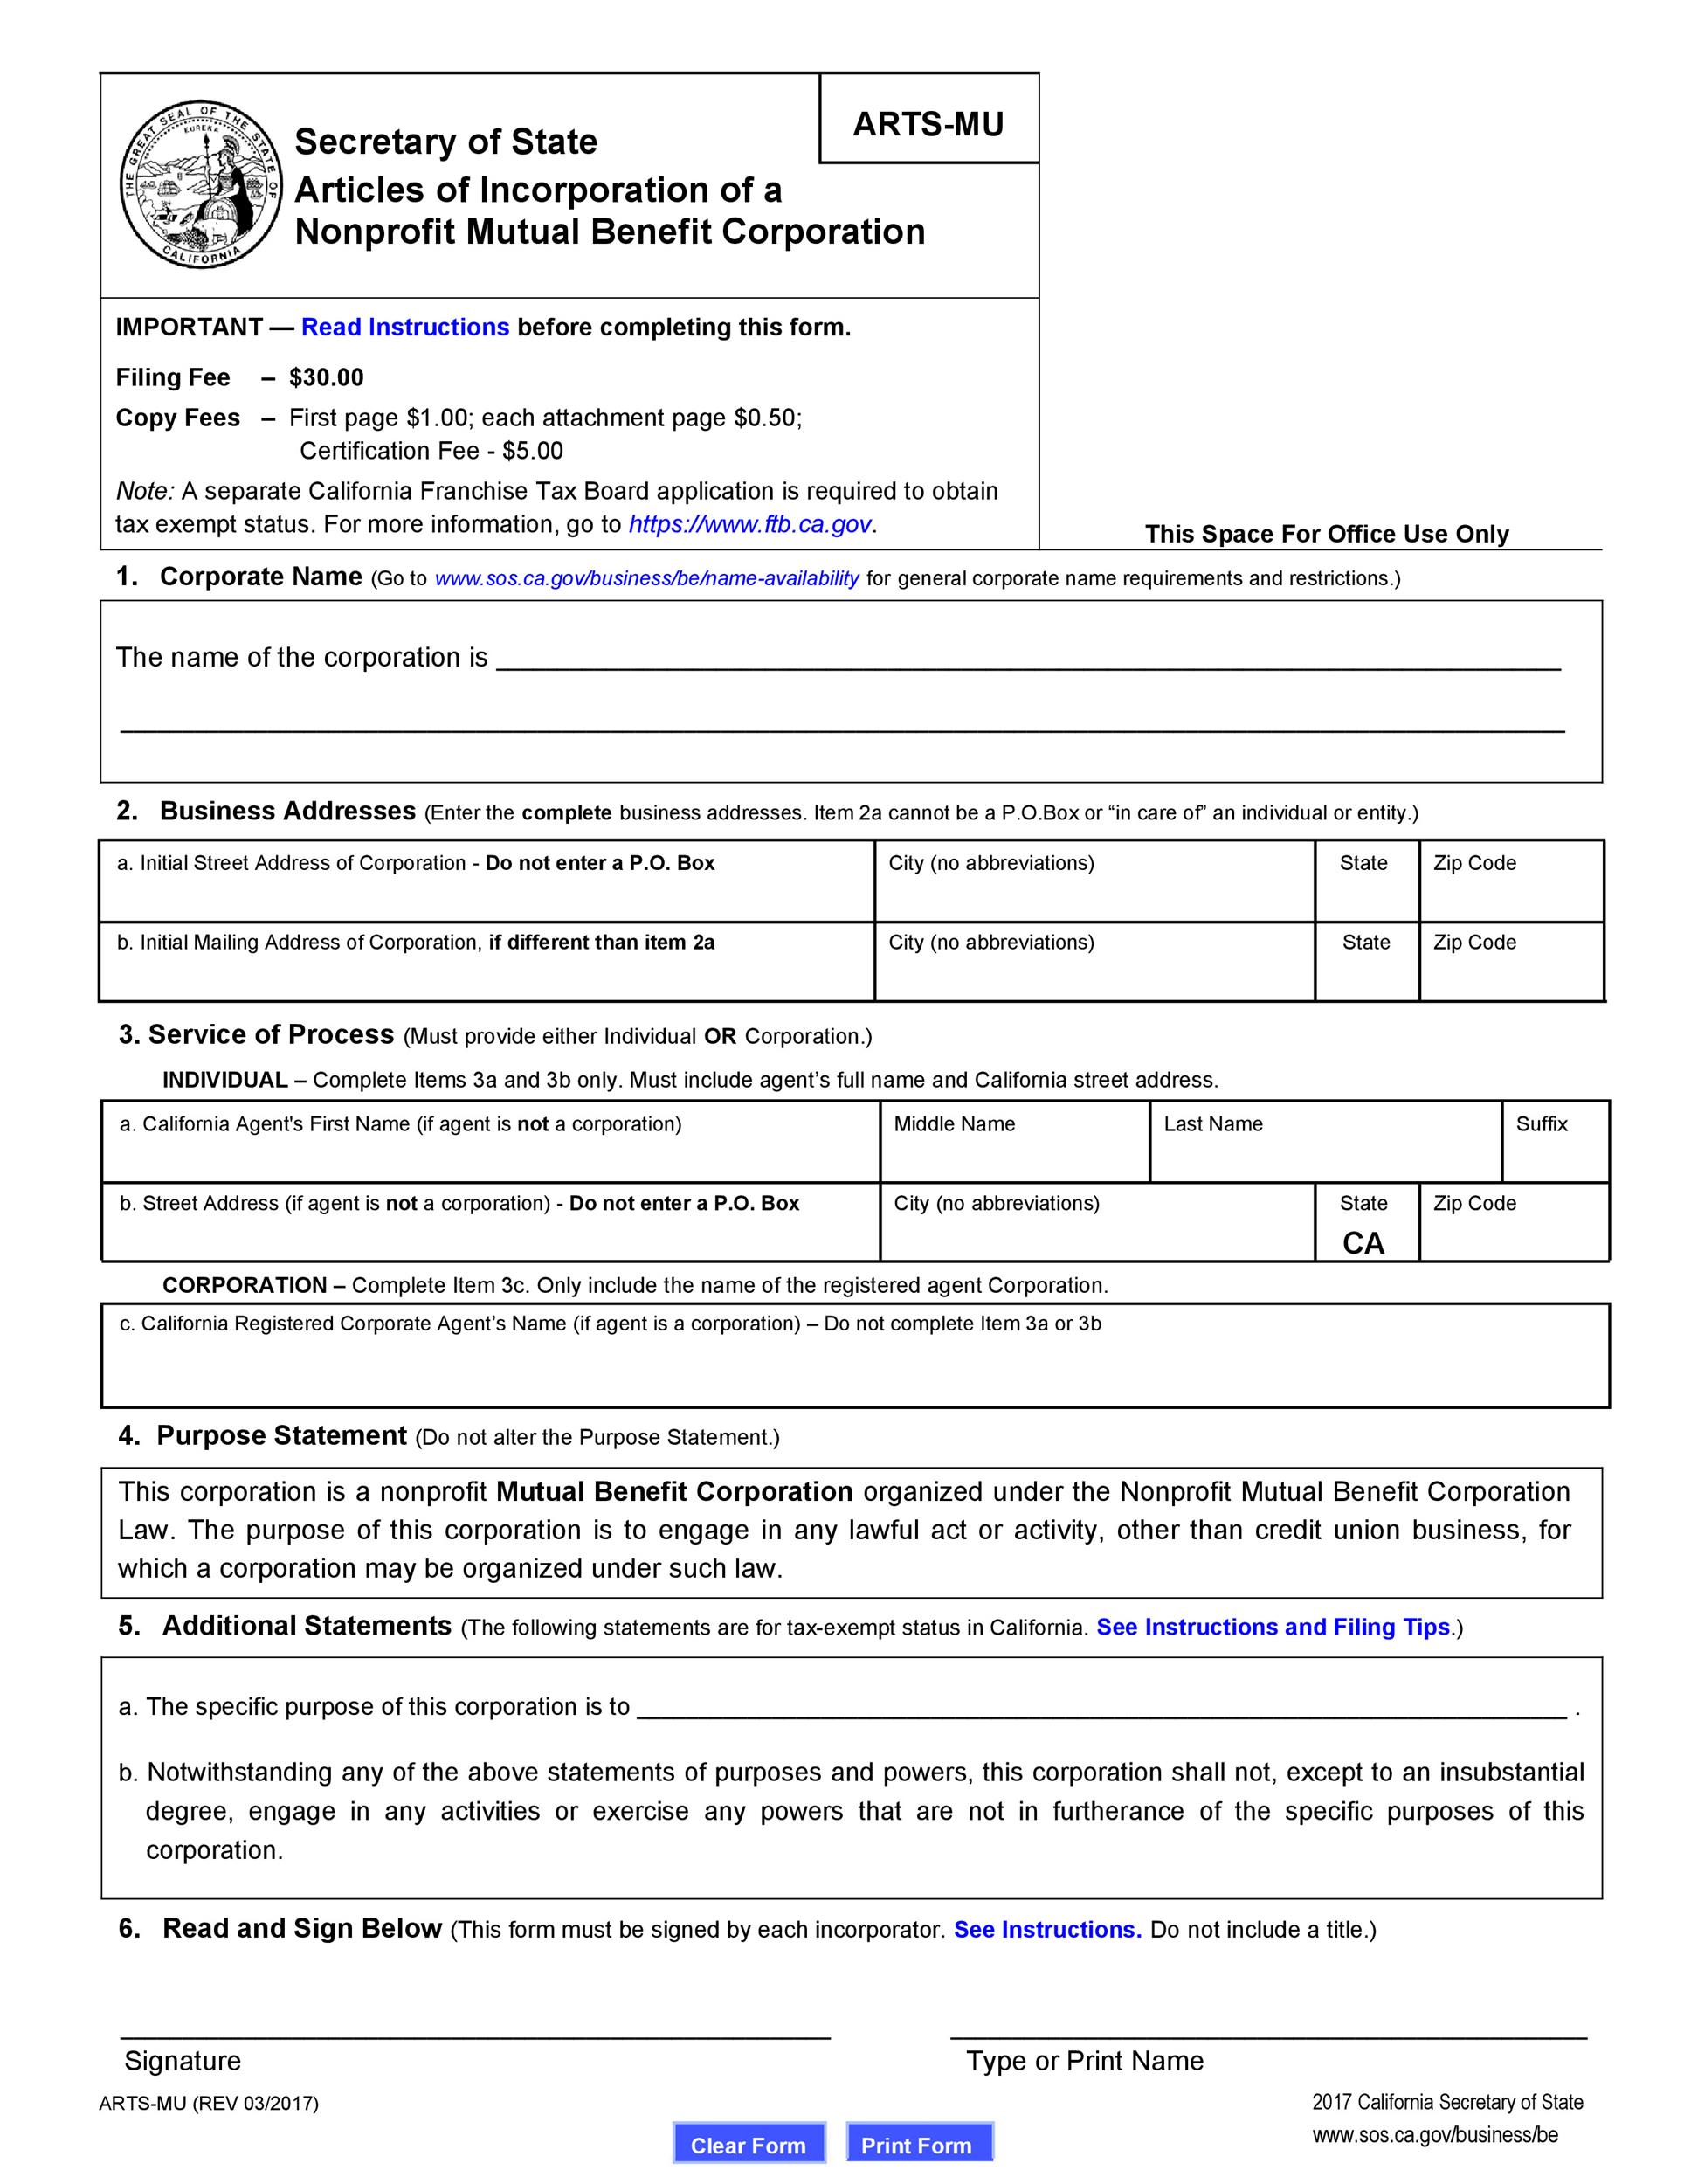 Free articles of incorporation template 45